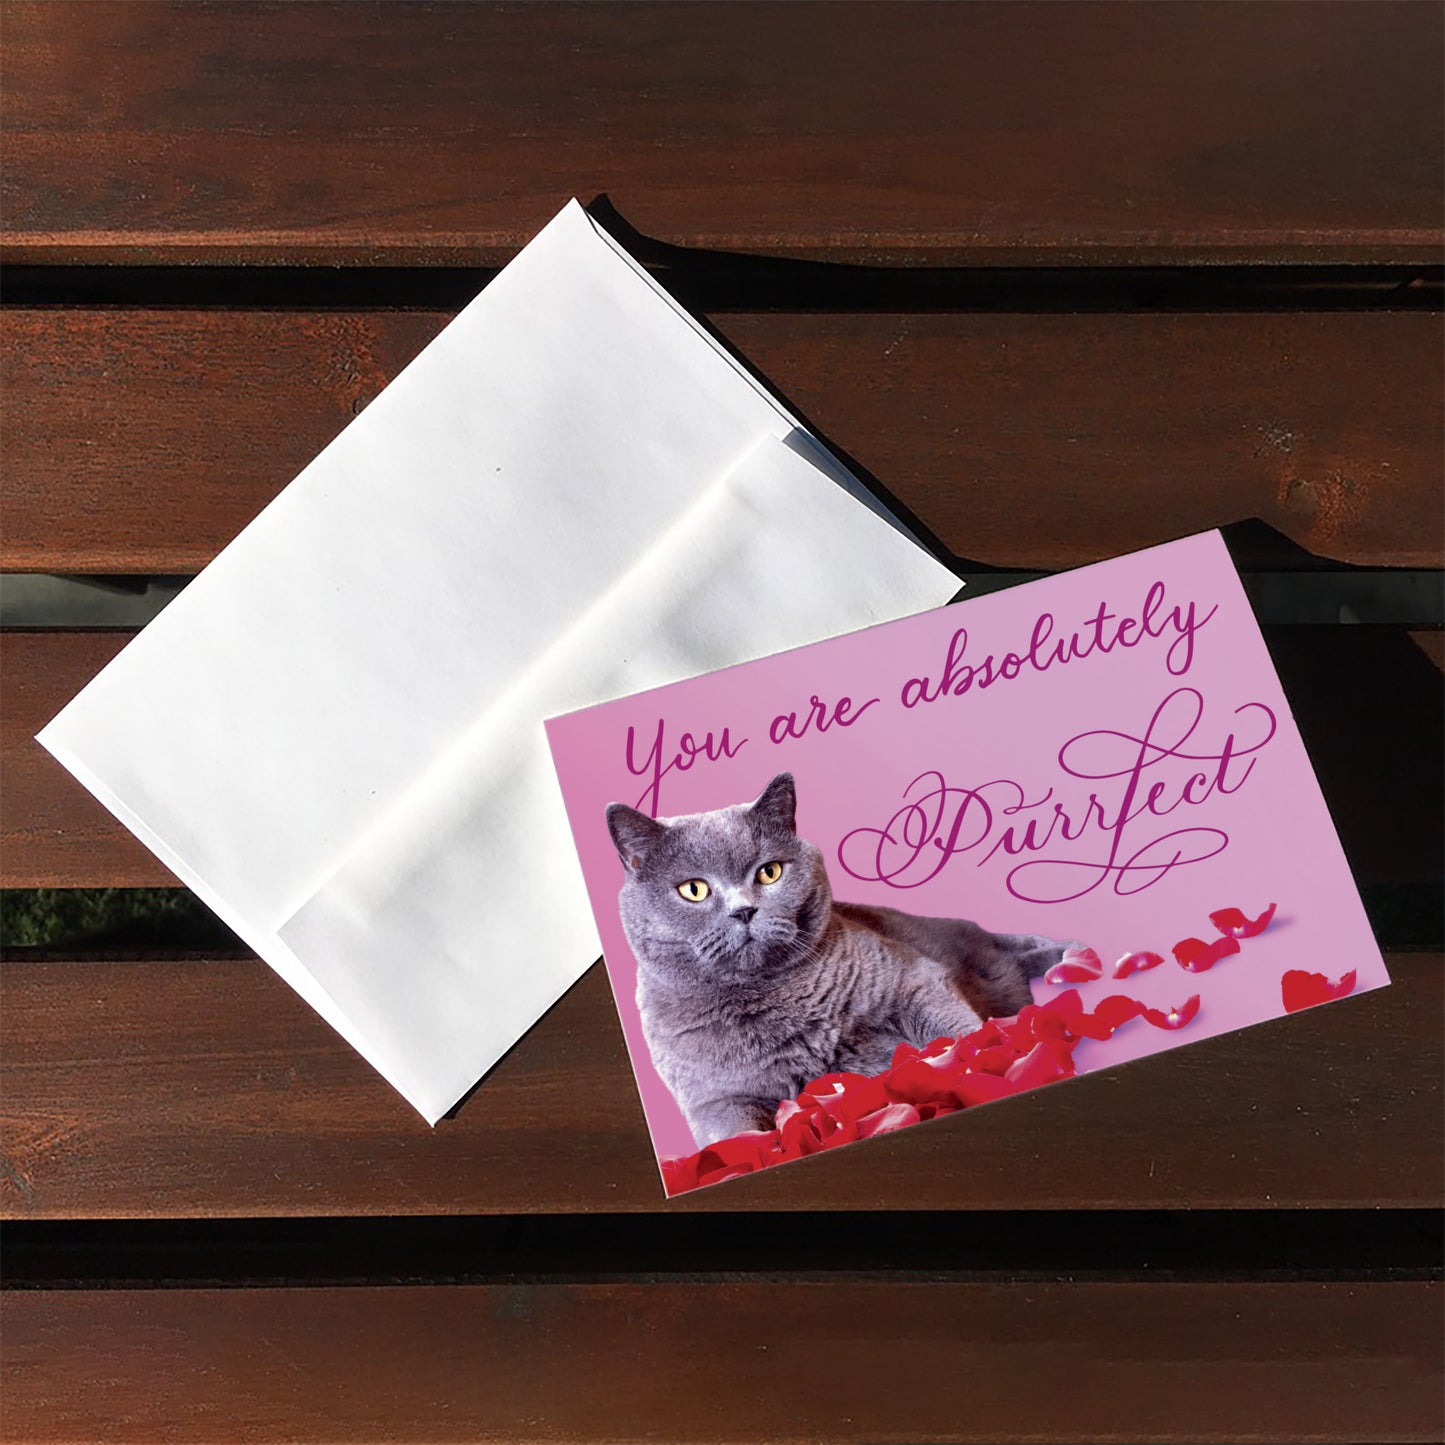 A top view of the greeting card: "You are absolutely Purrfect"